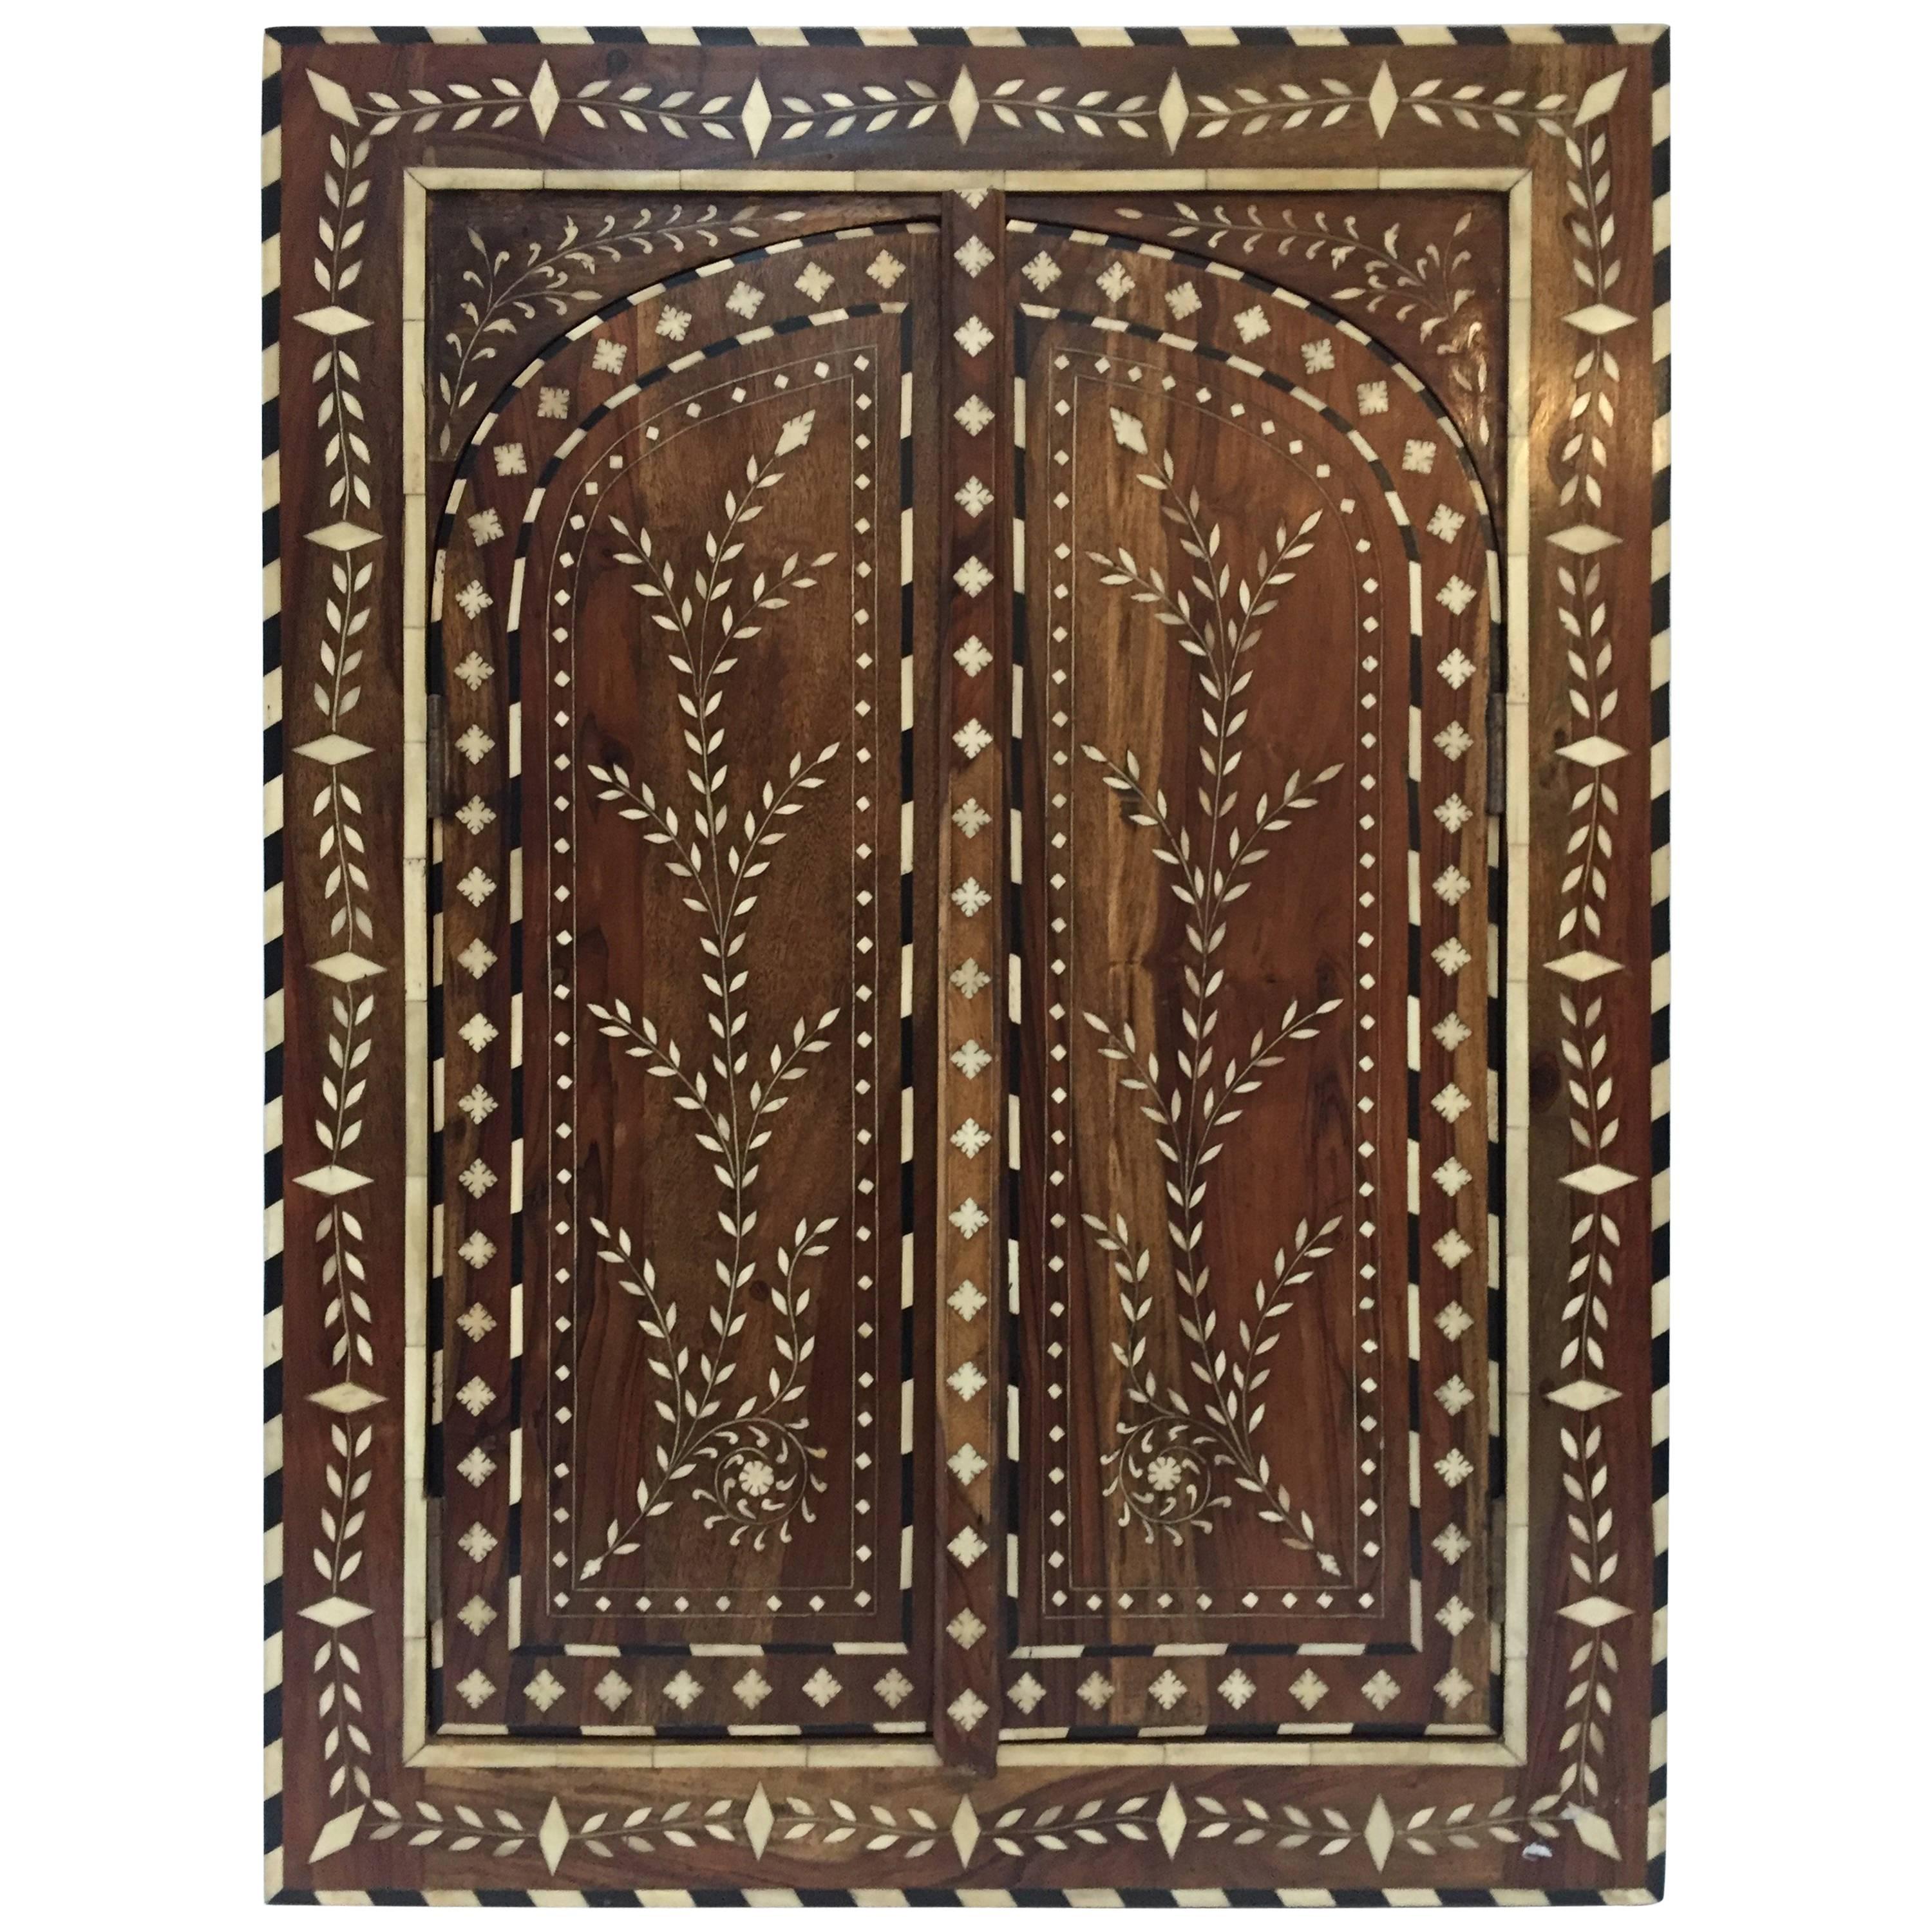 Vizagapatam Anglo-Indian Wall Window Mirror Inlaid with Ox Bone